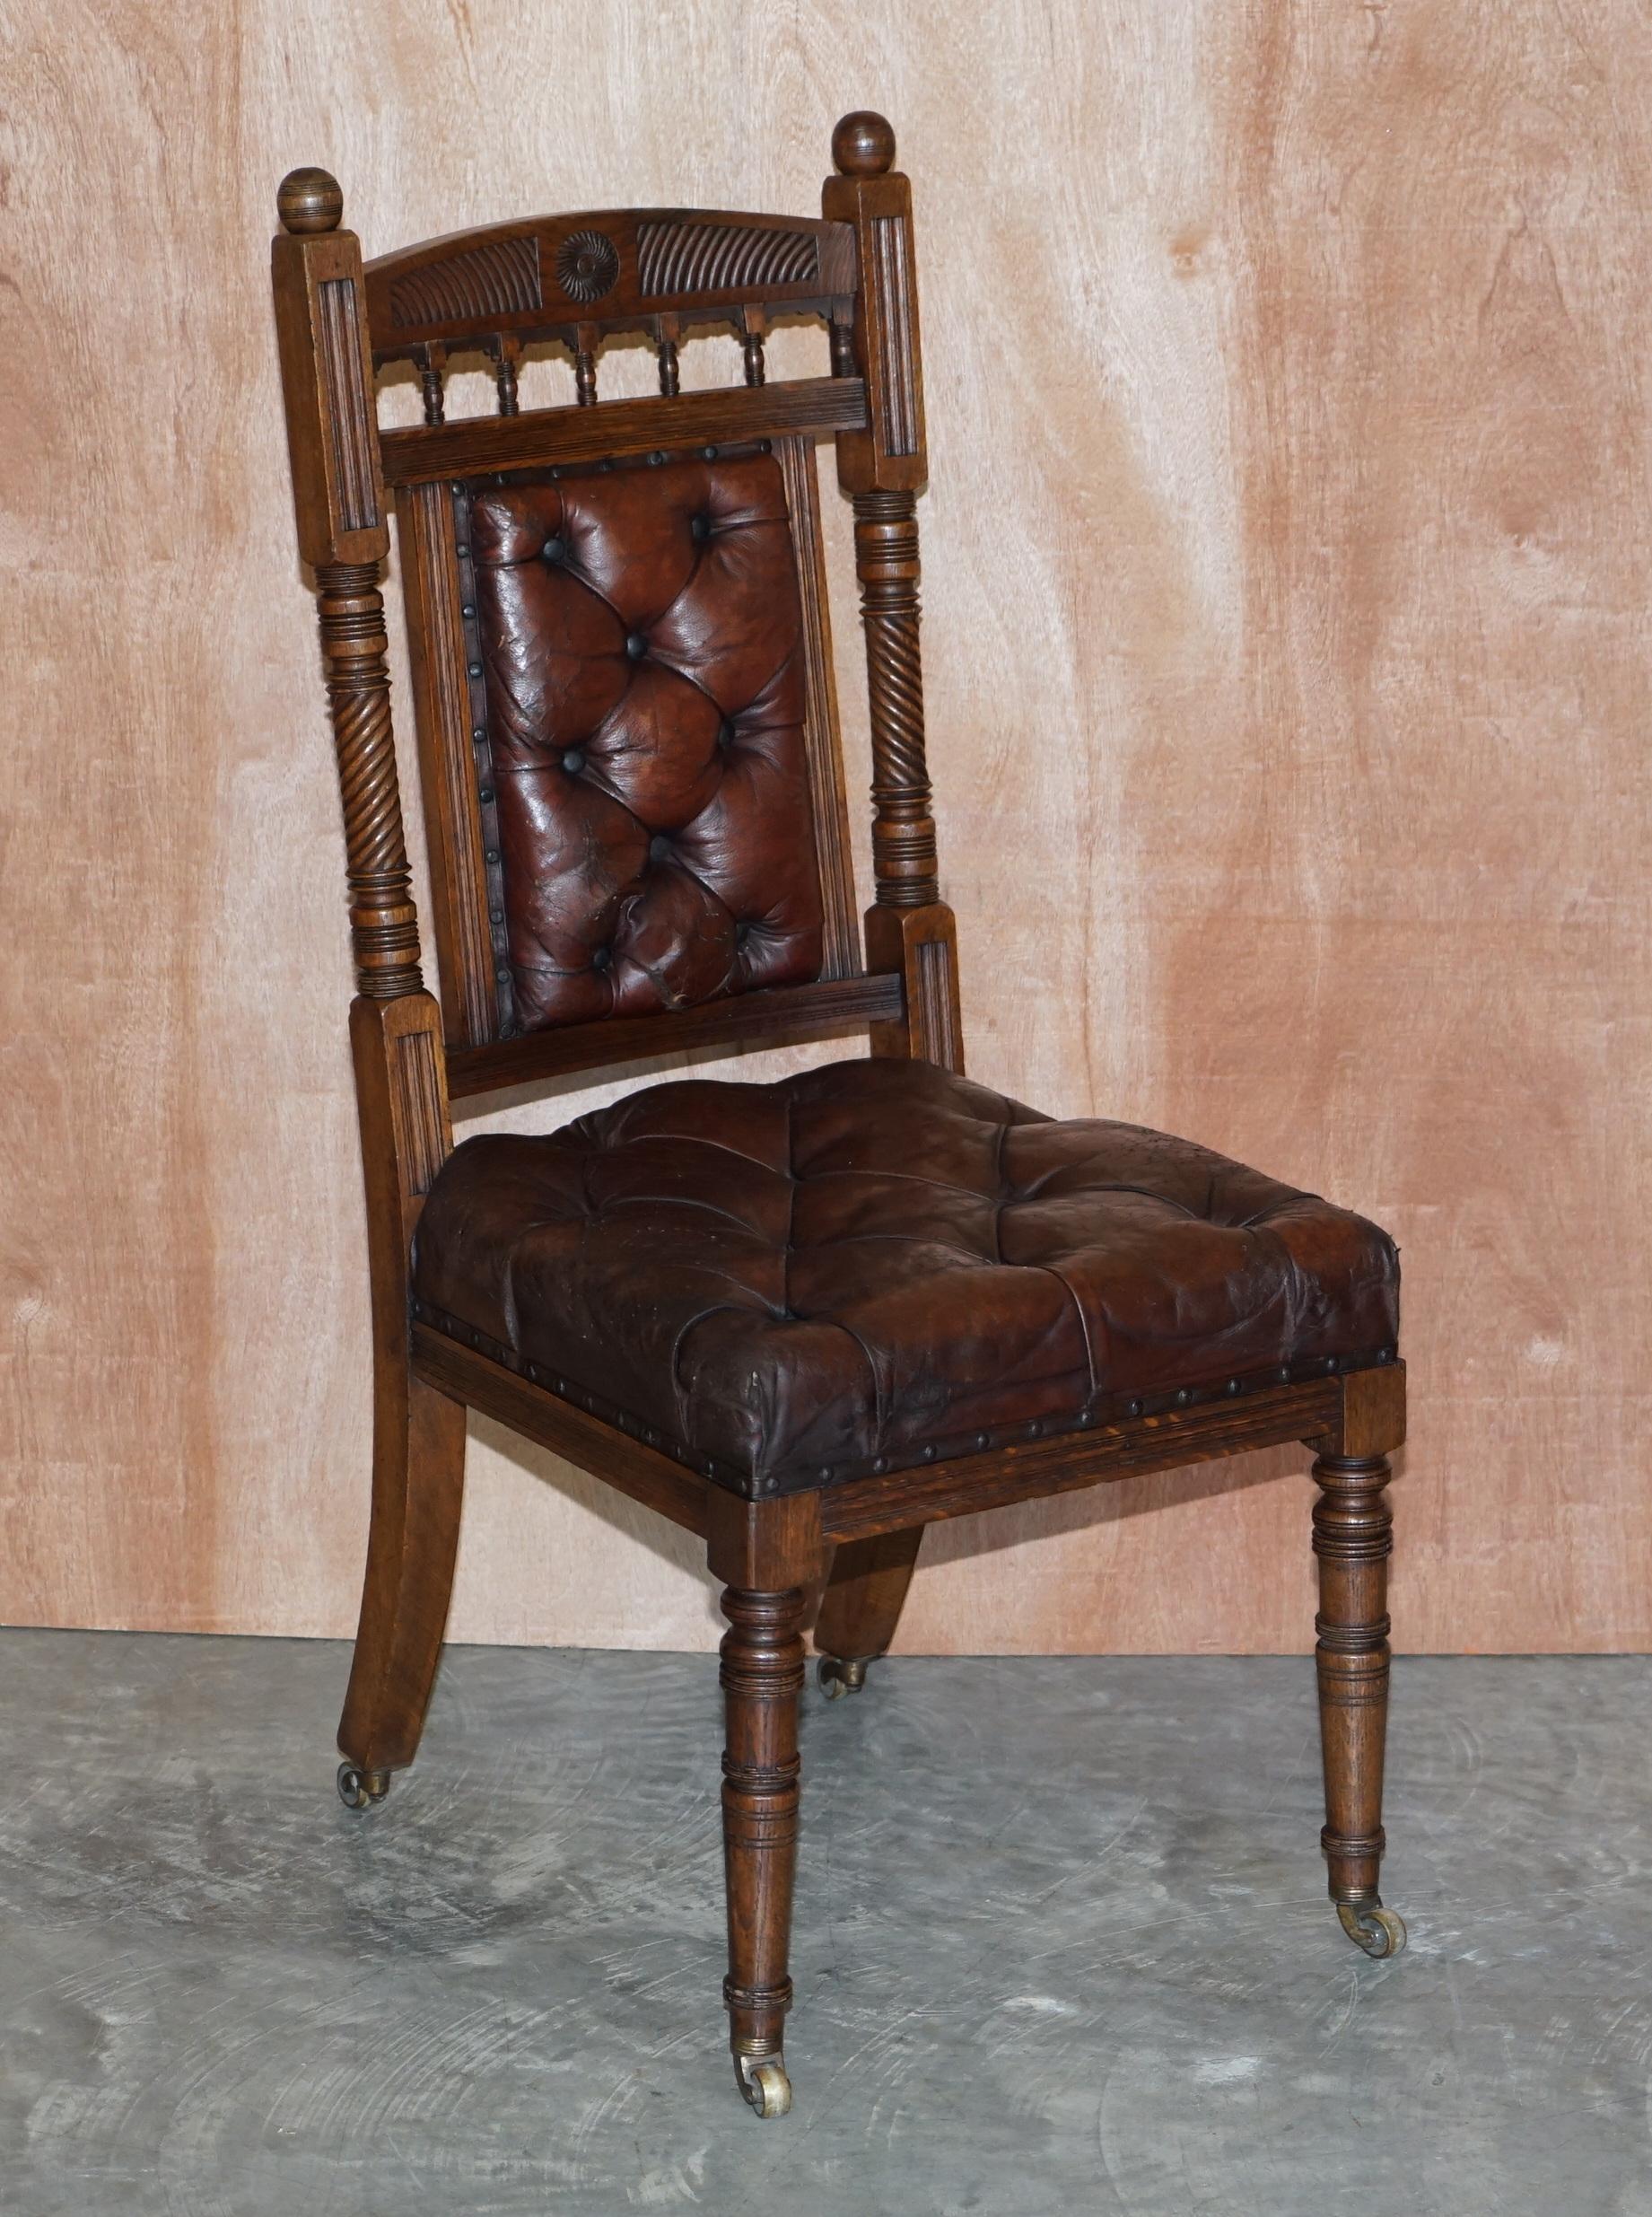 We are delighted to offer for sale this suite of six original unrestored Victorian oak and period brown leather dining chairs with brass castors front and back

A very well made antique suite of six dining chairs, most likely made by Maple and Co,